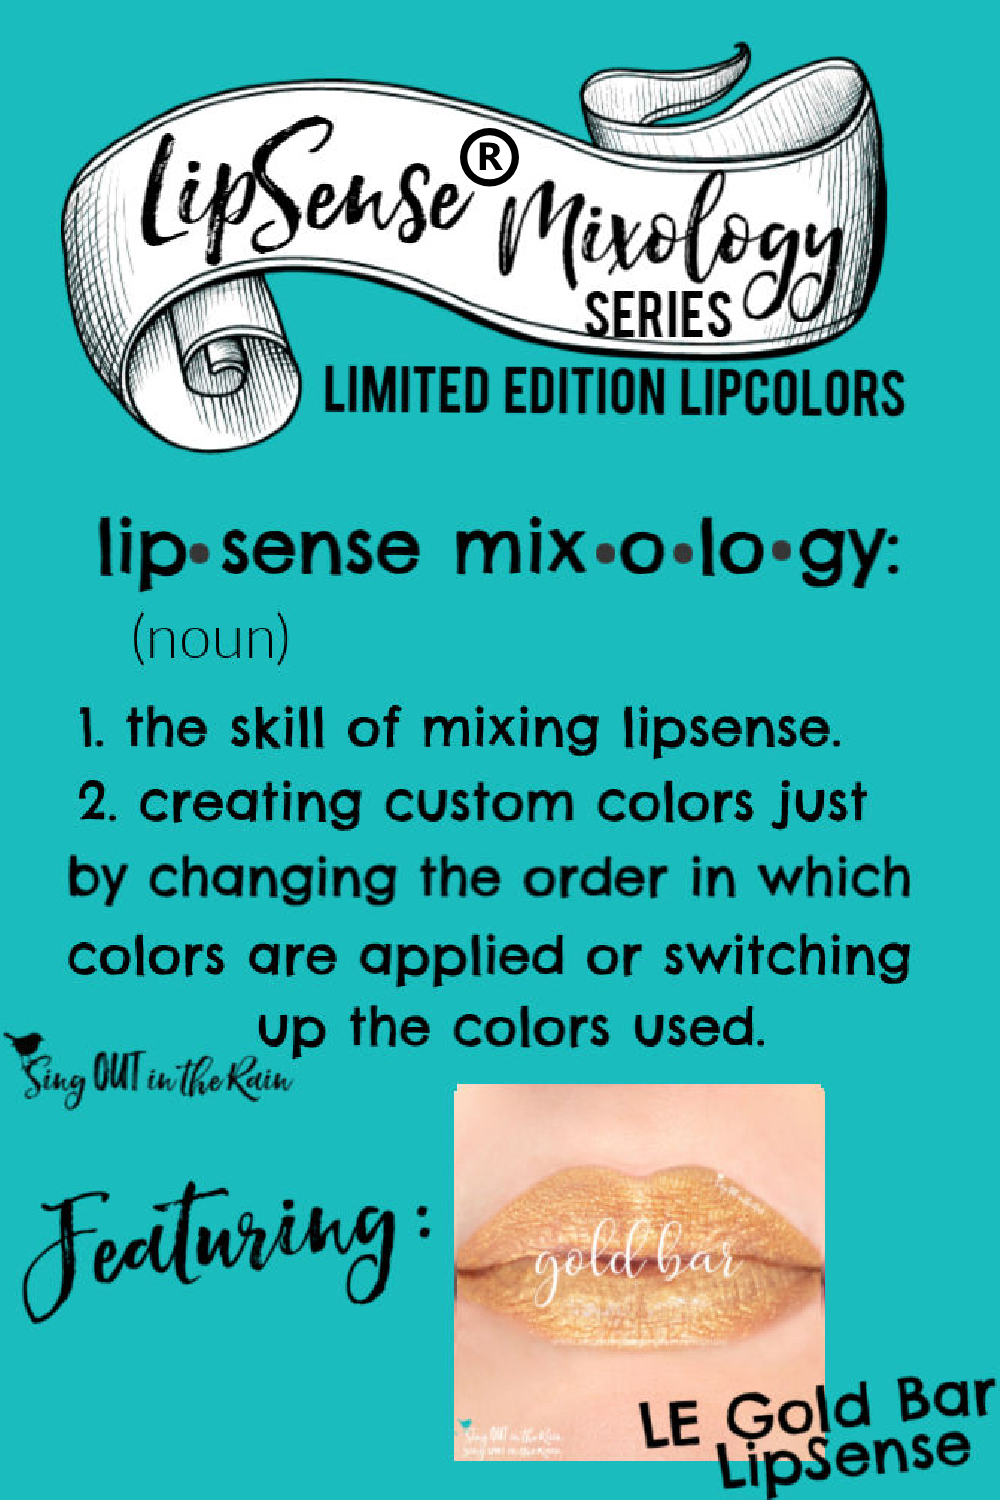 The Ultimate Guide to Gold Bar LipSense Mixology